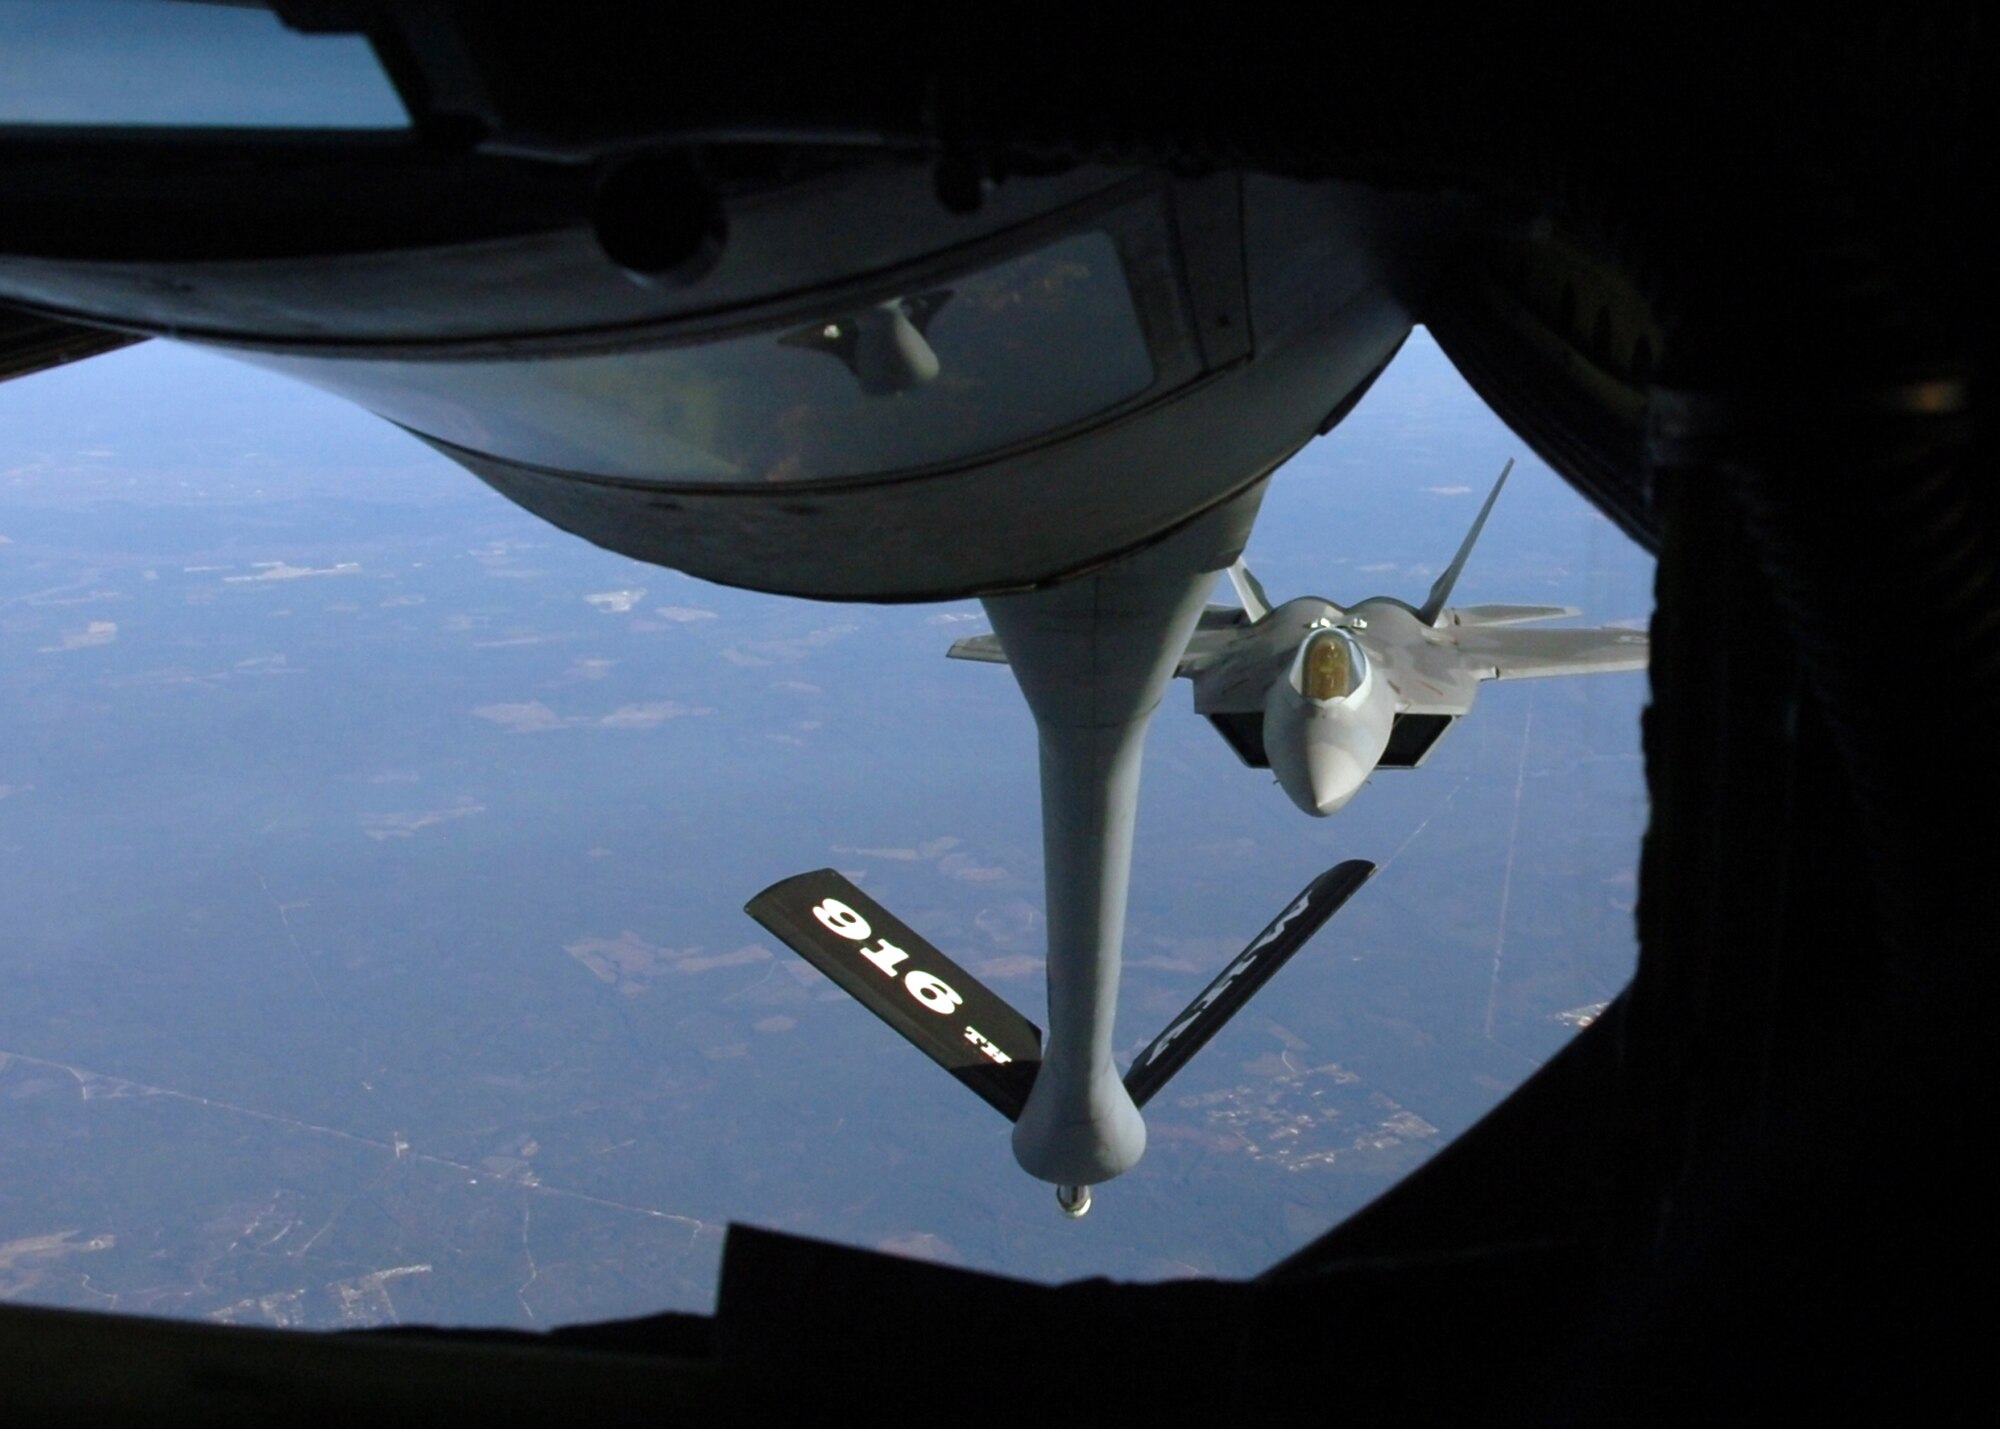 F-22 Raptor pilots from the 43rd Fighter Squadron, Tyndall AFB, Fla. conduct an air-to-air refueling training mission over Eglin AFB Dec. 4. The 916th Air Refueling Wing, which is an Air Force Reserve Wing located at Seymour Johnson AFB, N.C., provided KC-135R Stratotanker support during the mission. Tanker and fighter units from across the country travel to the Florida Panhandle to support the Raptor training mission based at Tyndall AFB. (U.S. Air Force photo/Staff Sgt. Bryan Franks)